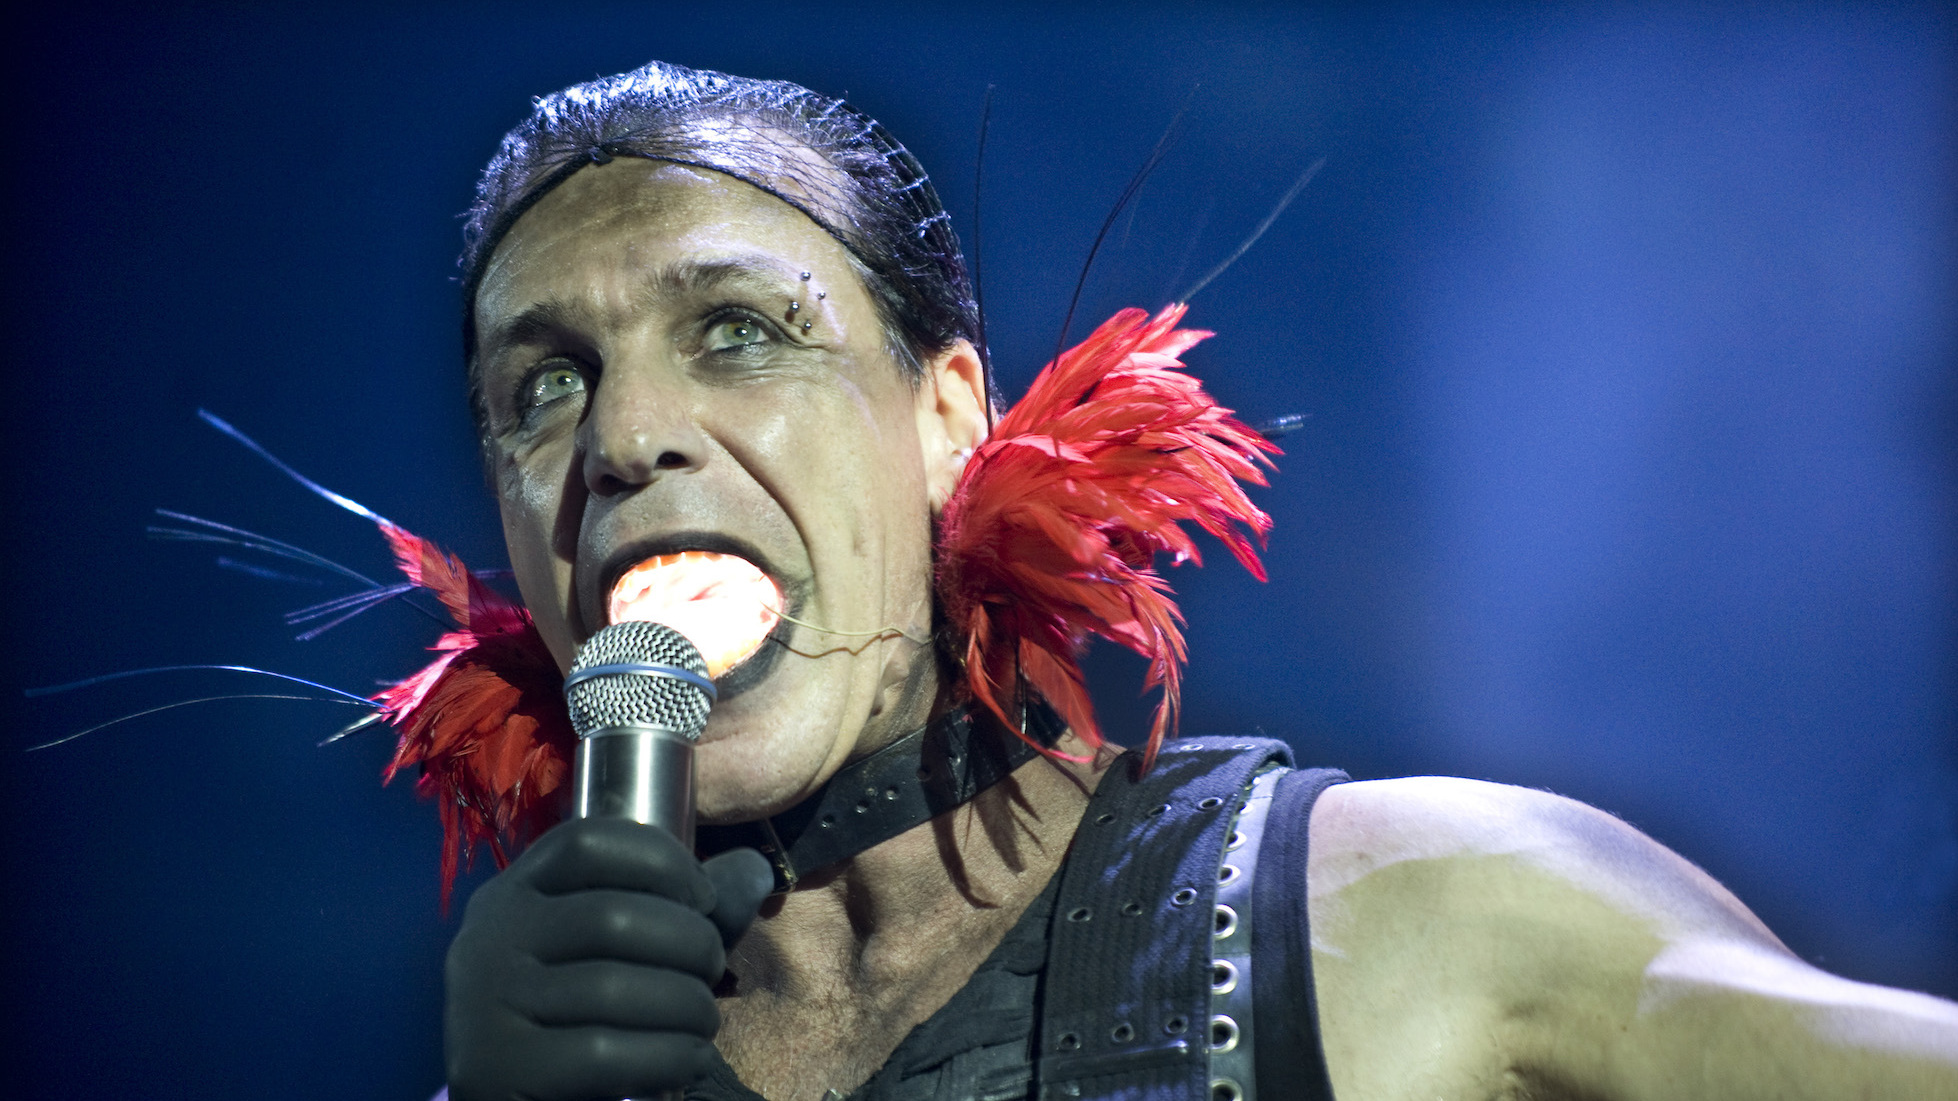 Till Lindemann Mouth Light - The Light In Tils Mouth Explained.